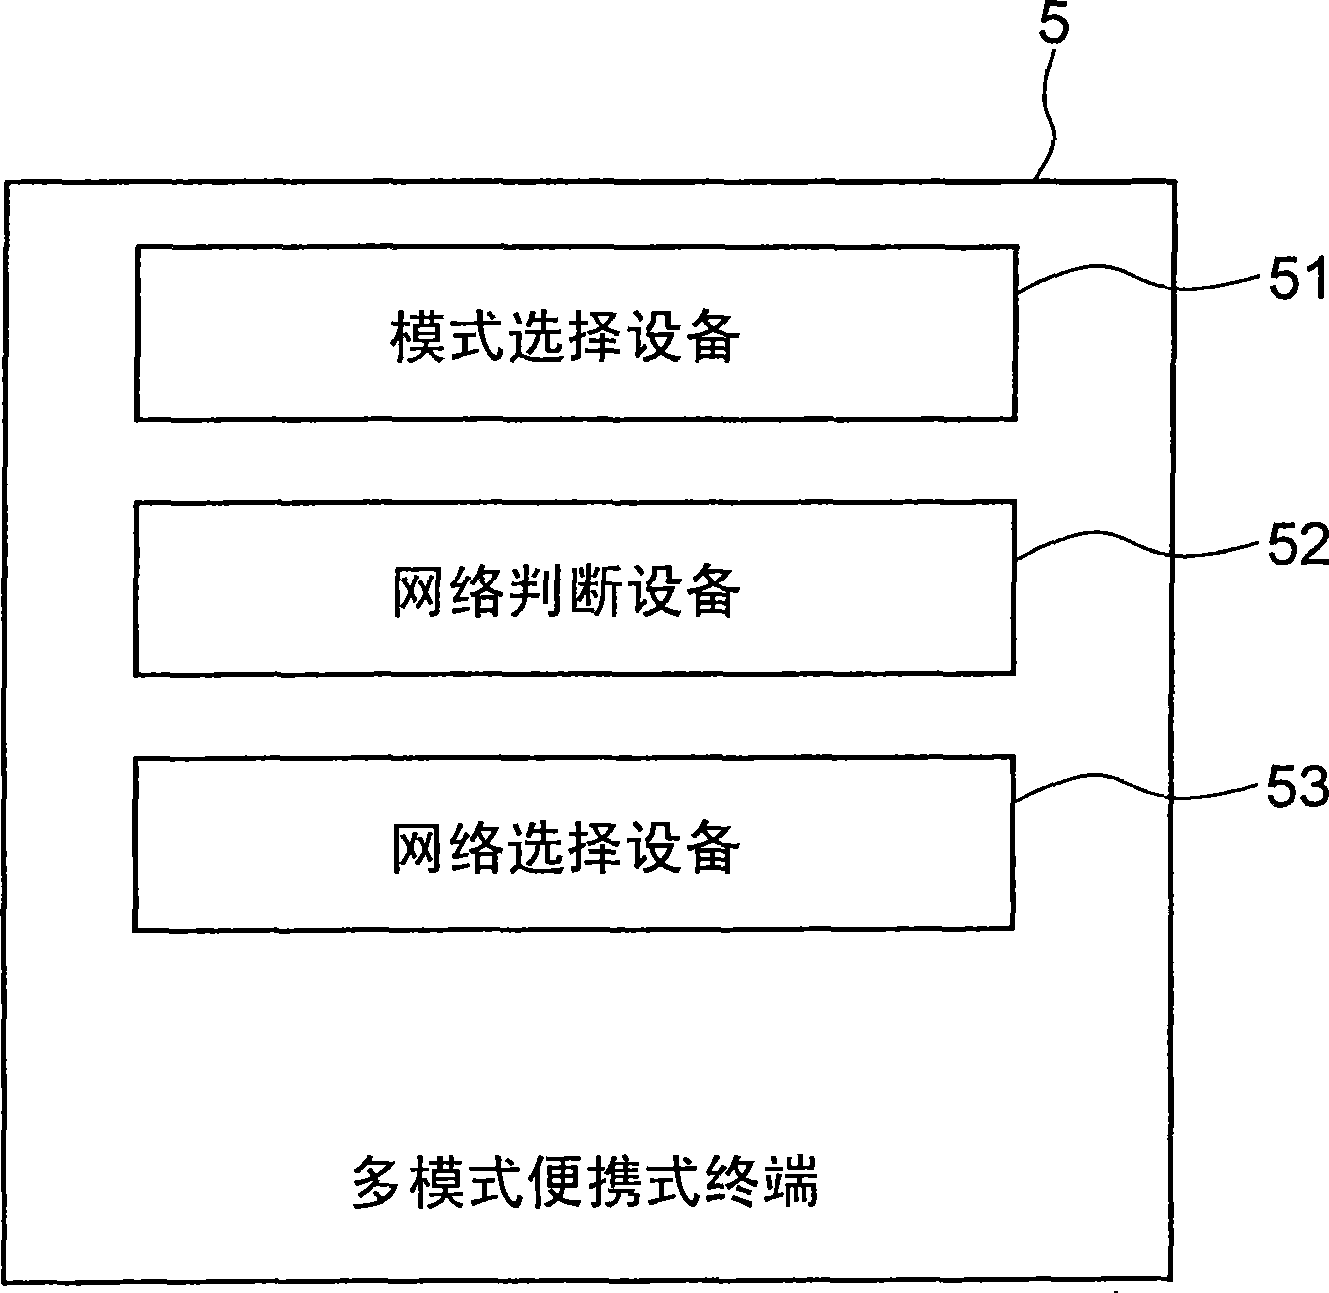 Multimode portable terminal and mode switch-over method